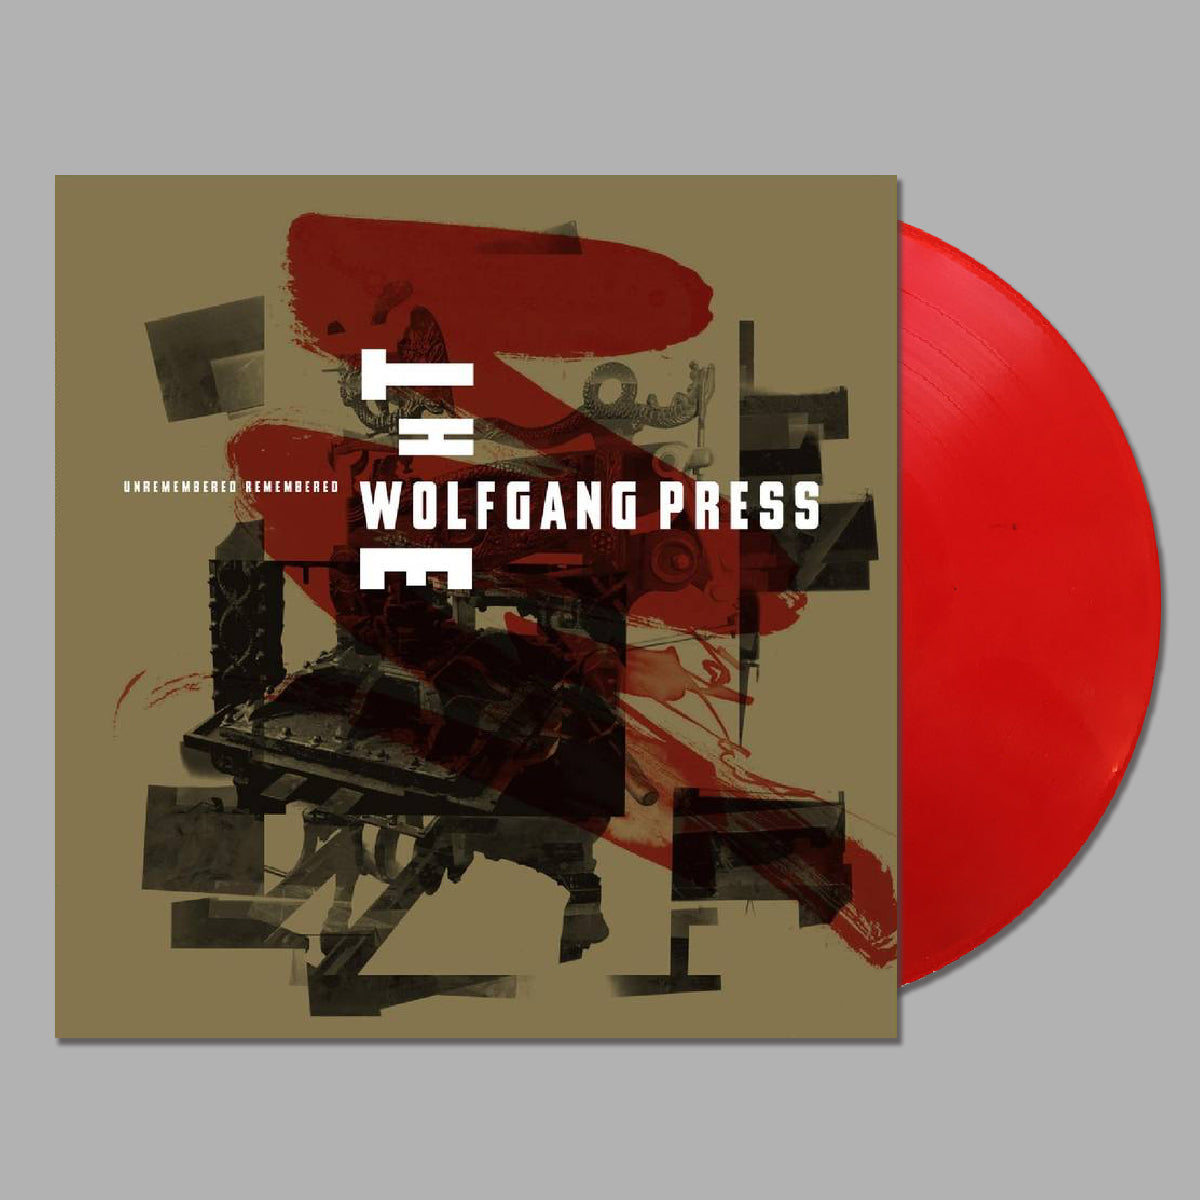 The Wolfgang Press — Unrembered Remembered [RSD]